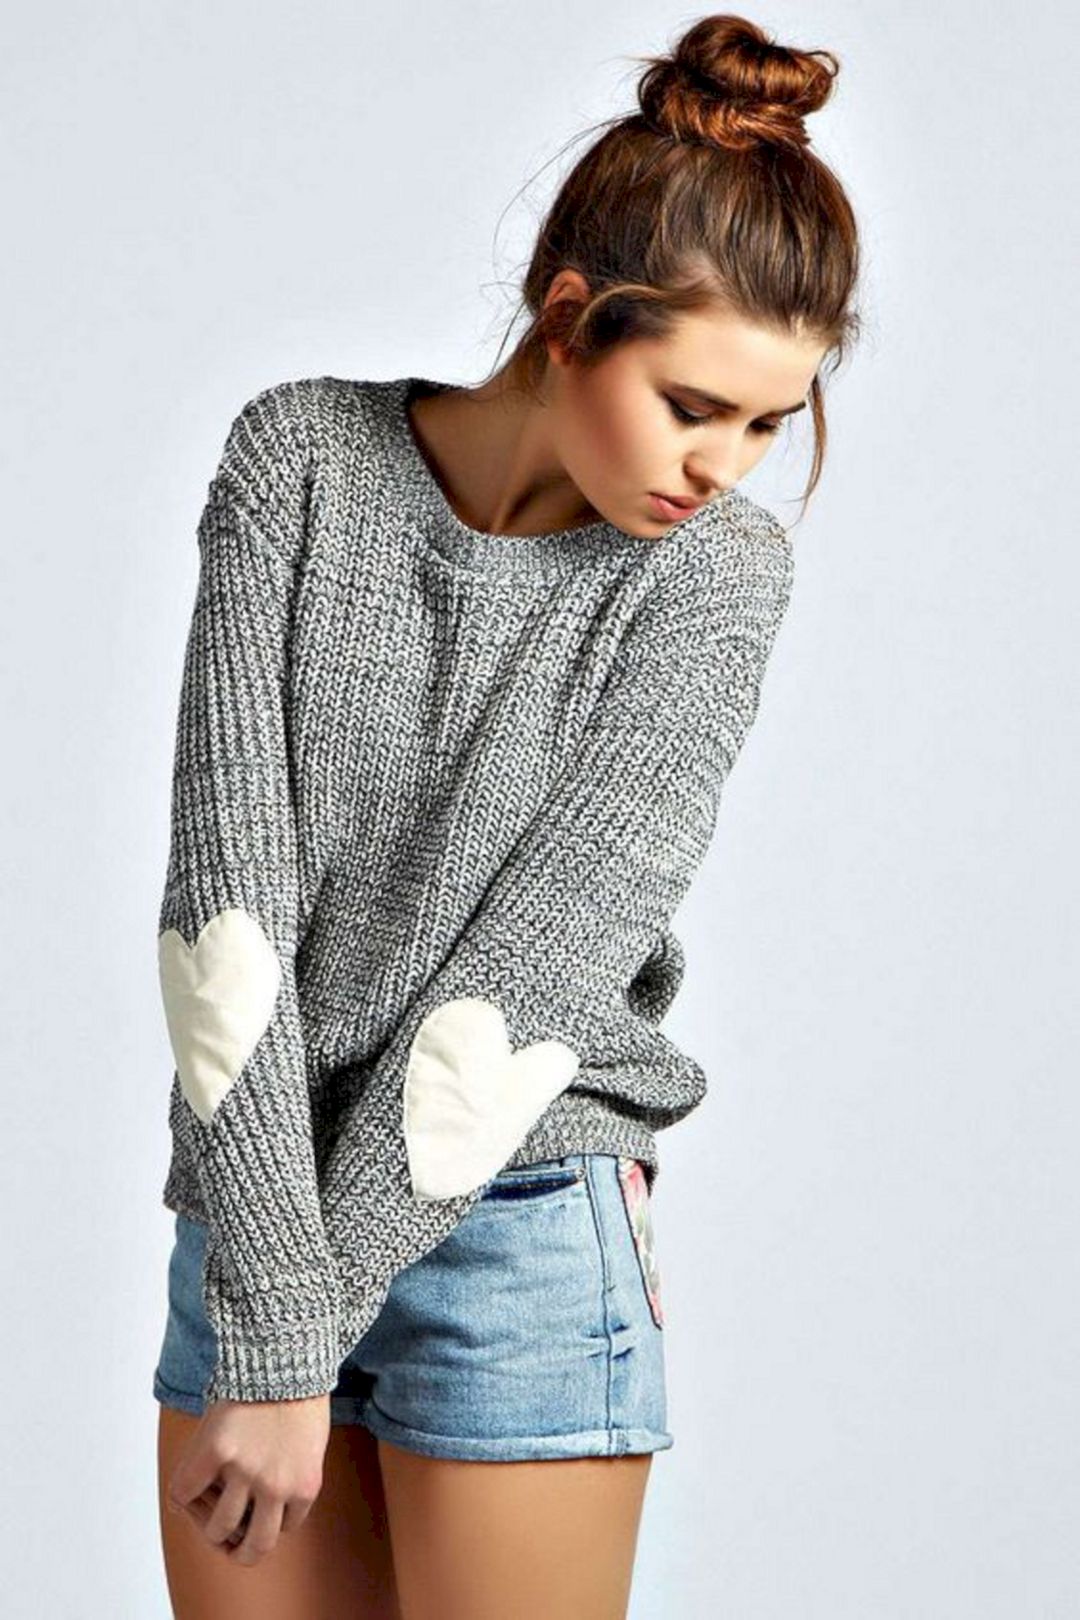 Incredible outfit ideas to wear early fall sweaters